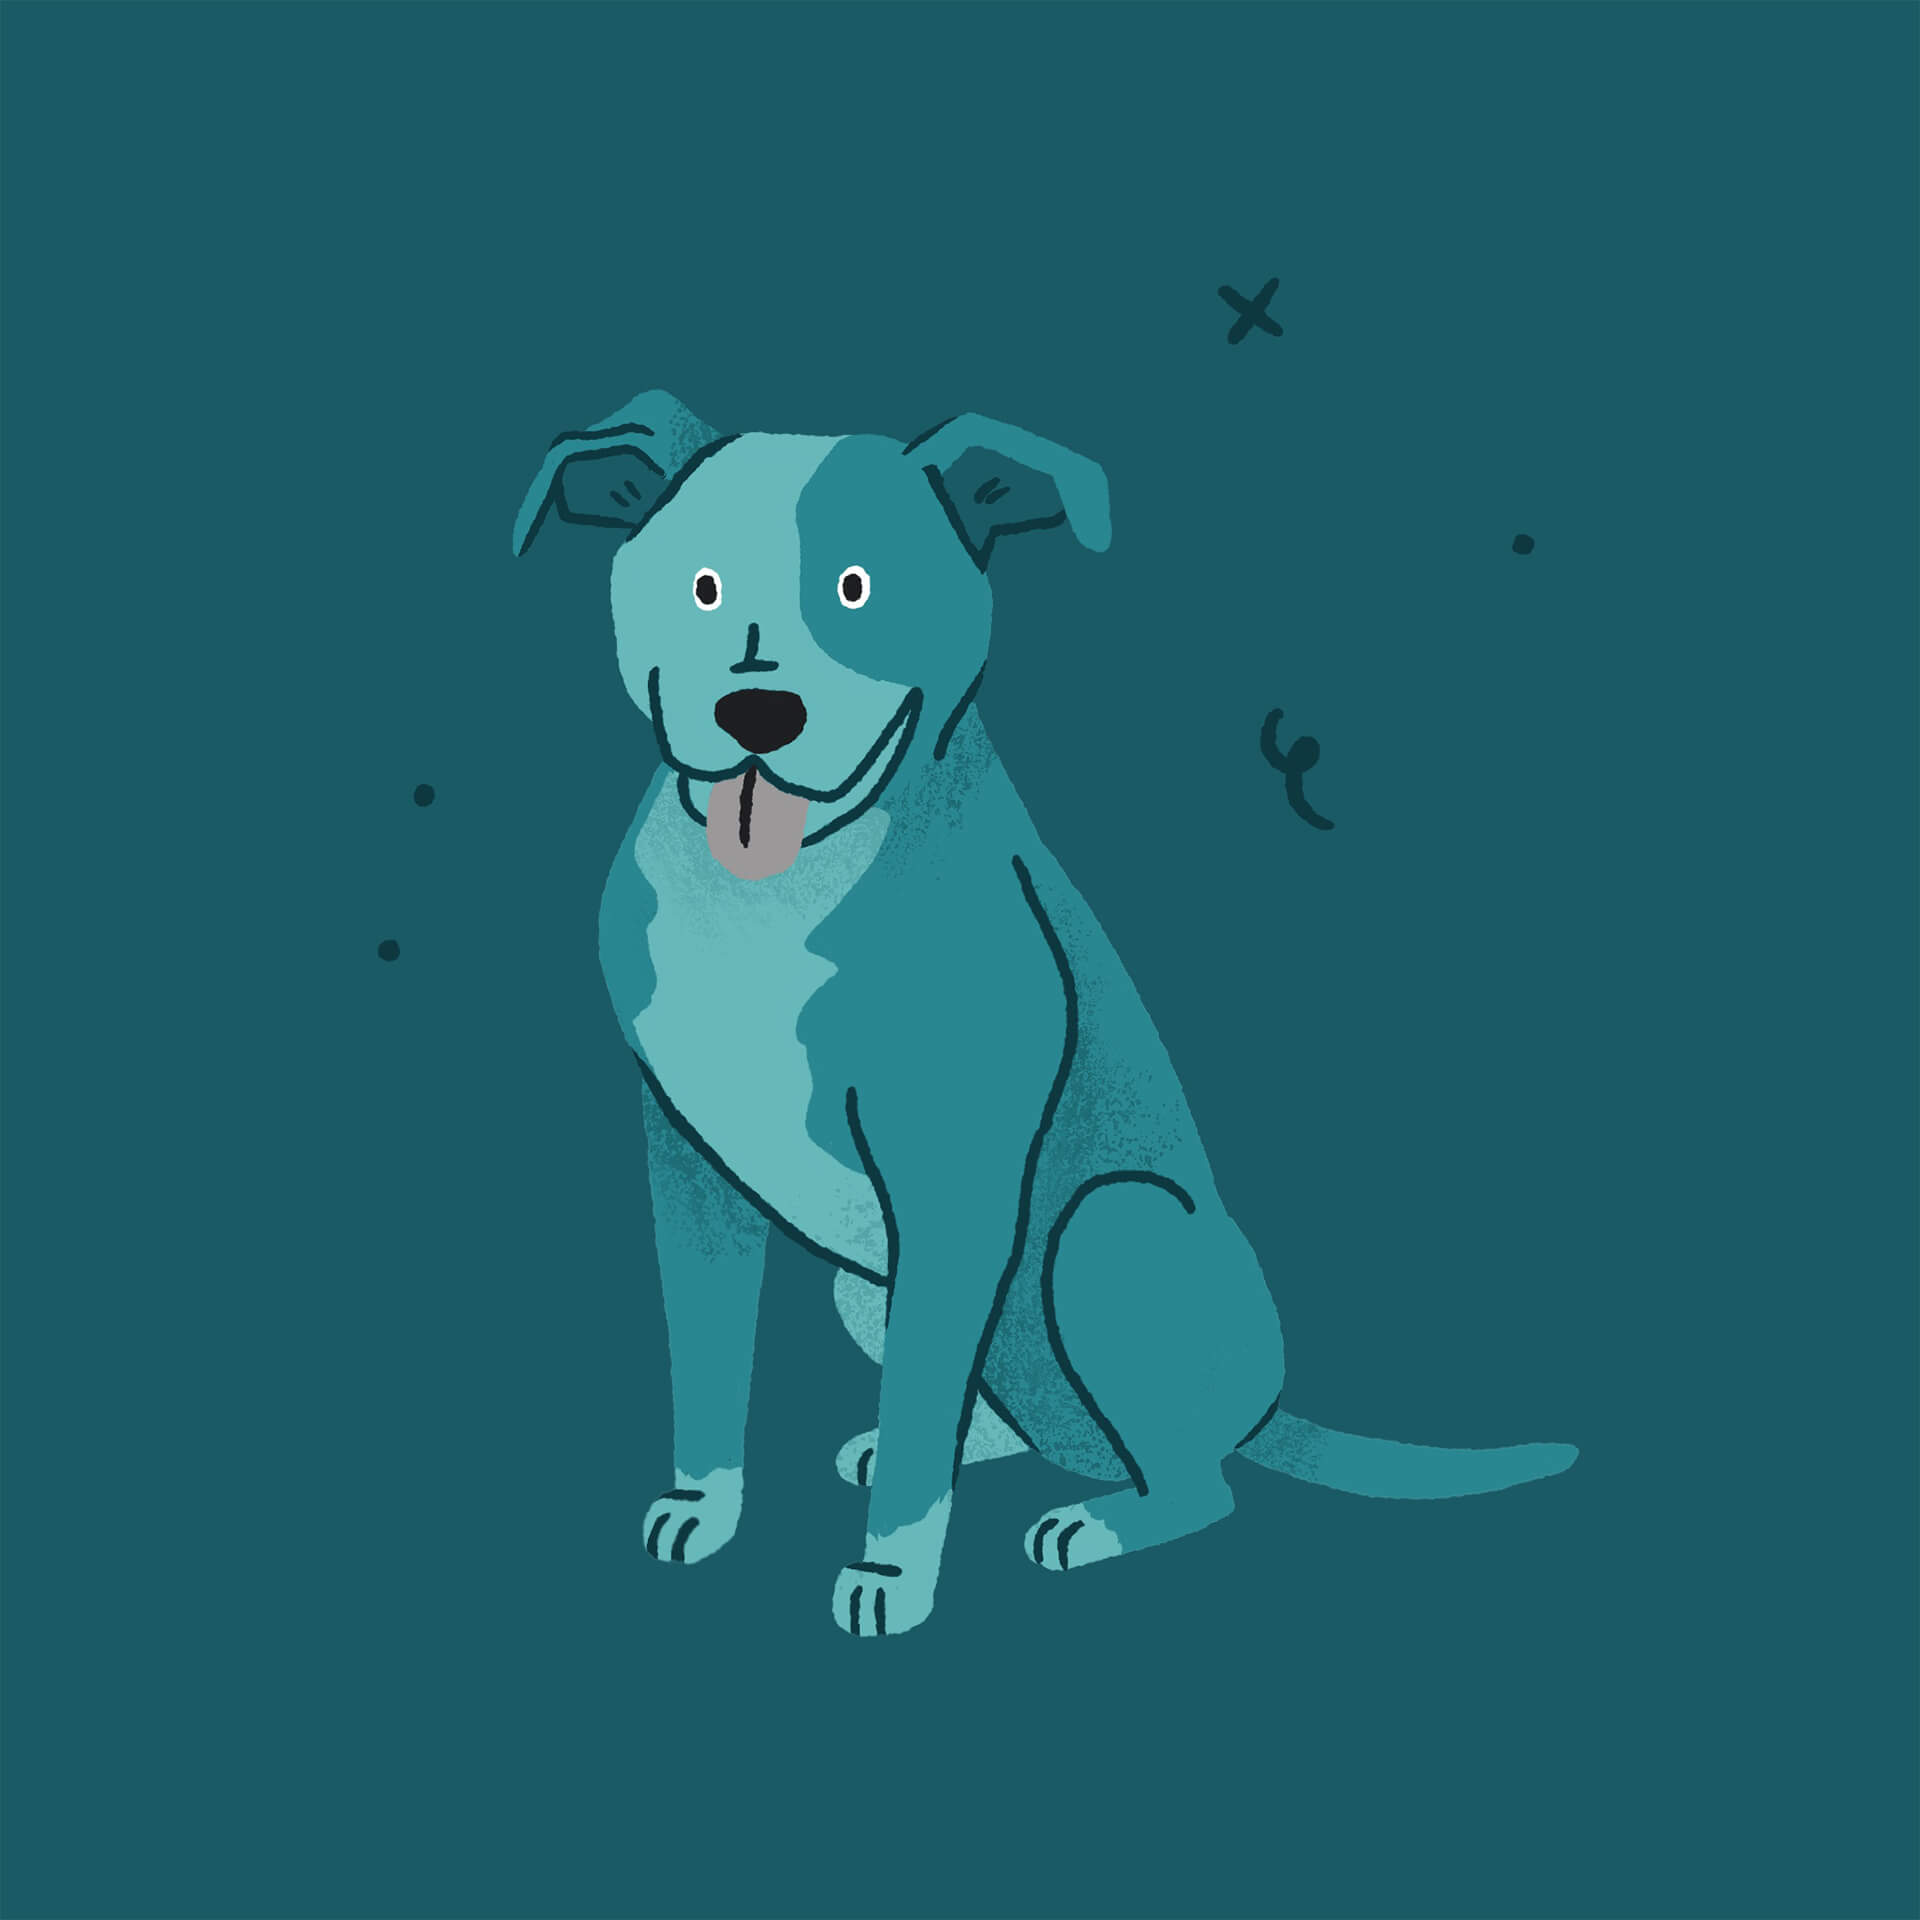 An illustration of a blue pitbull dog sitting and smiling with its tongue out